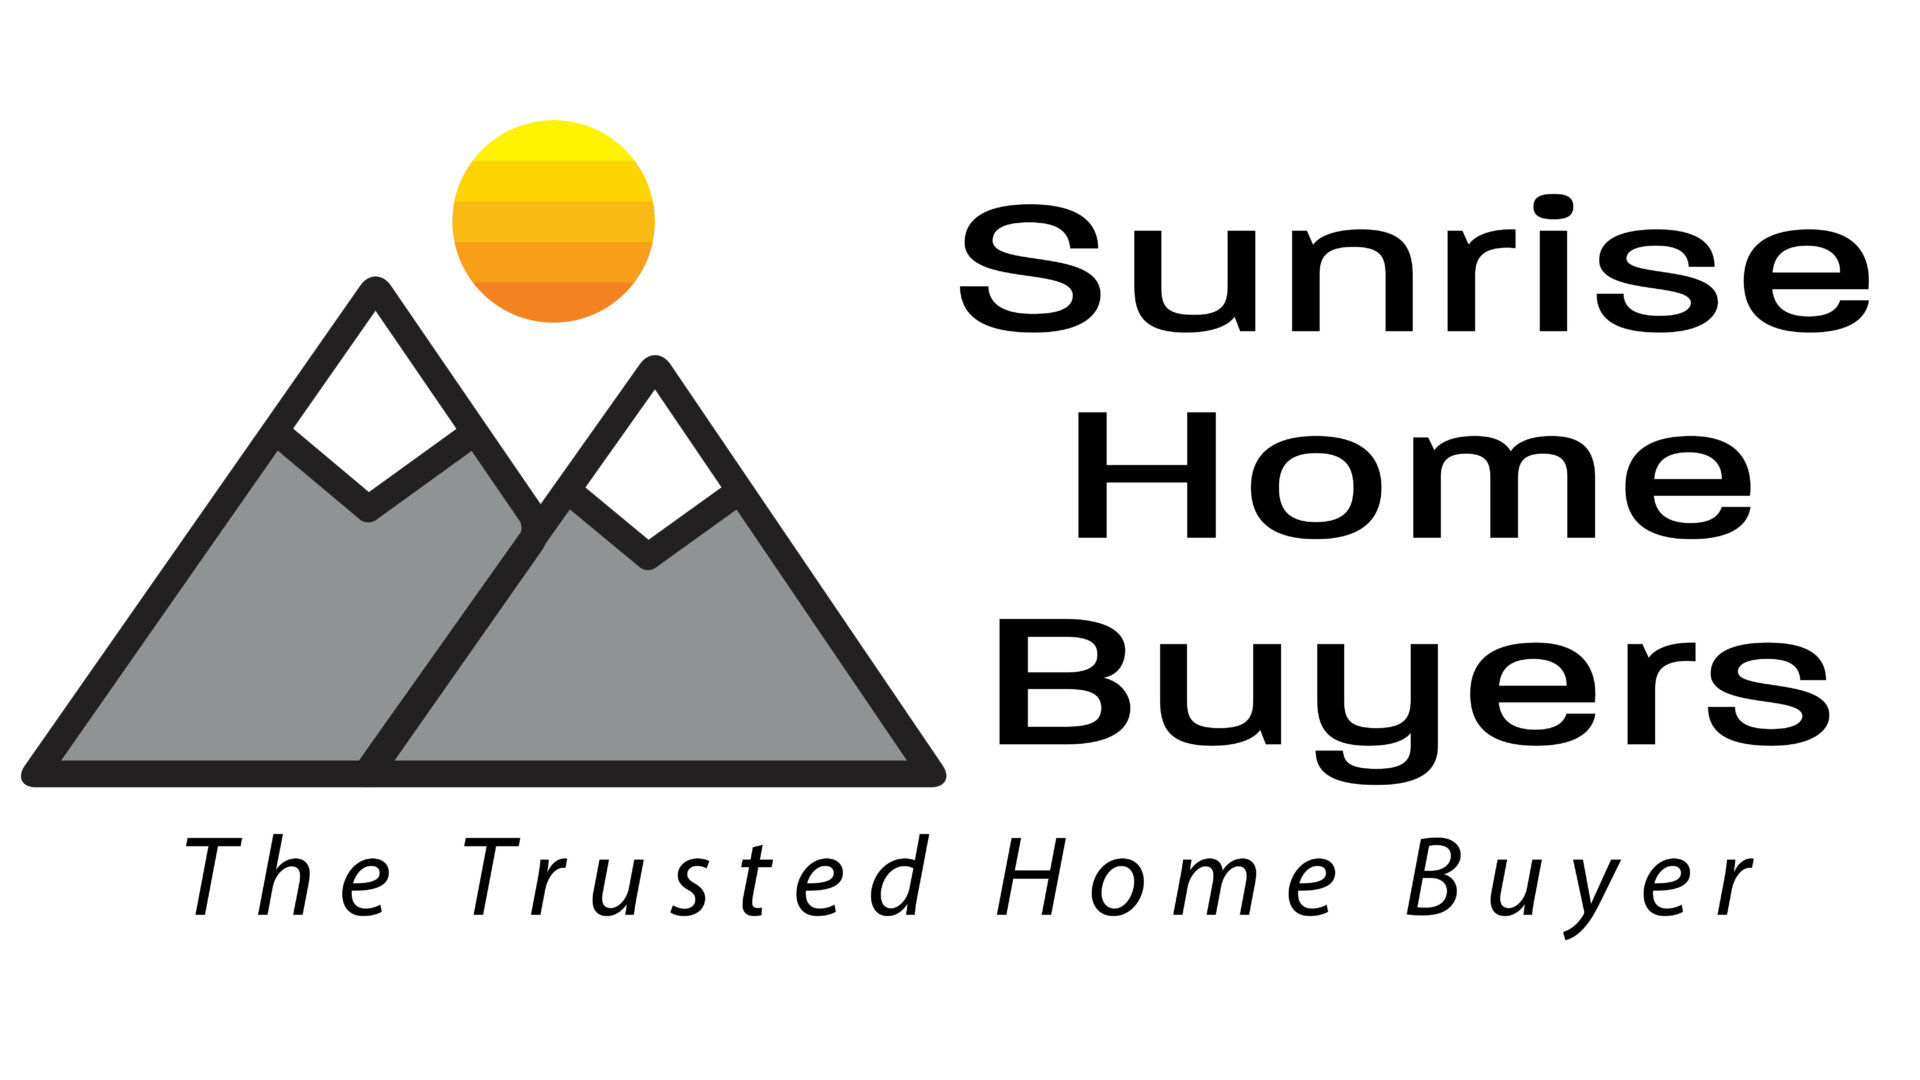 Sunrise Home Buyers Expands Into All Alberta Markets Enabling Homeowners To Sell Their Homes Fast and Efficiently